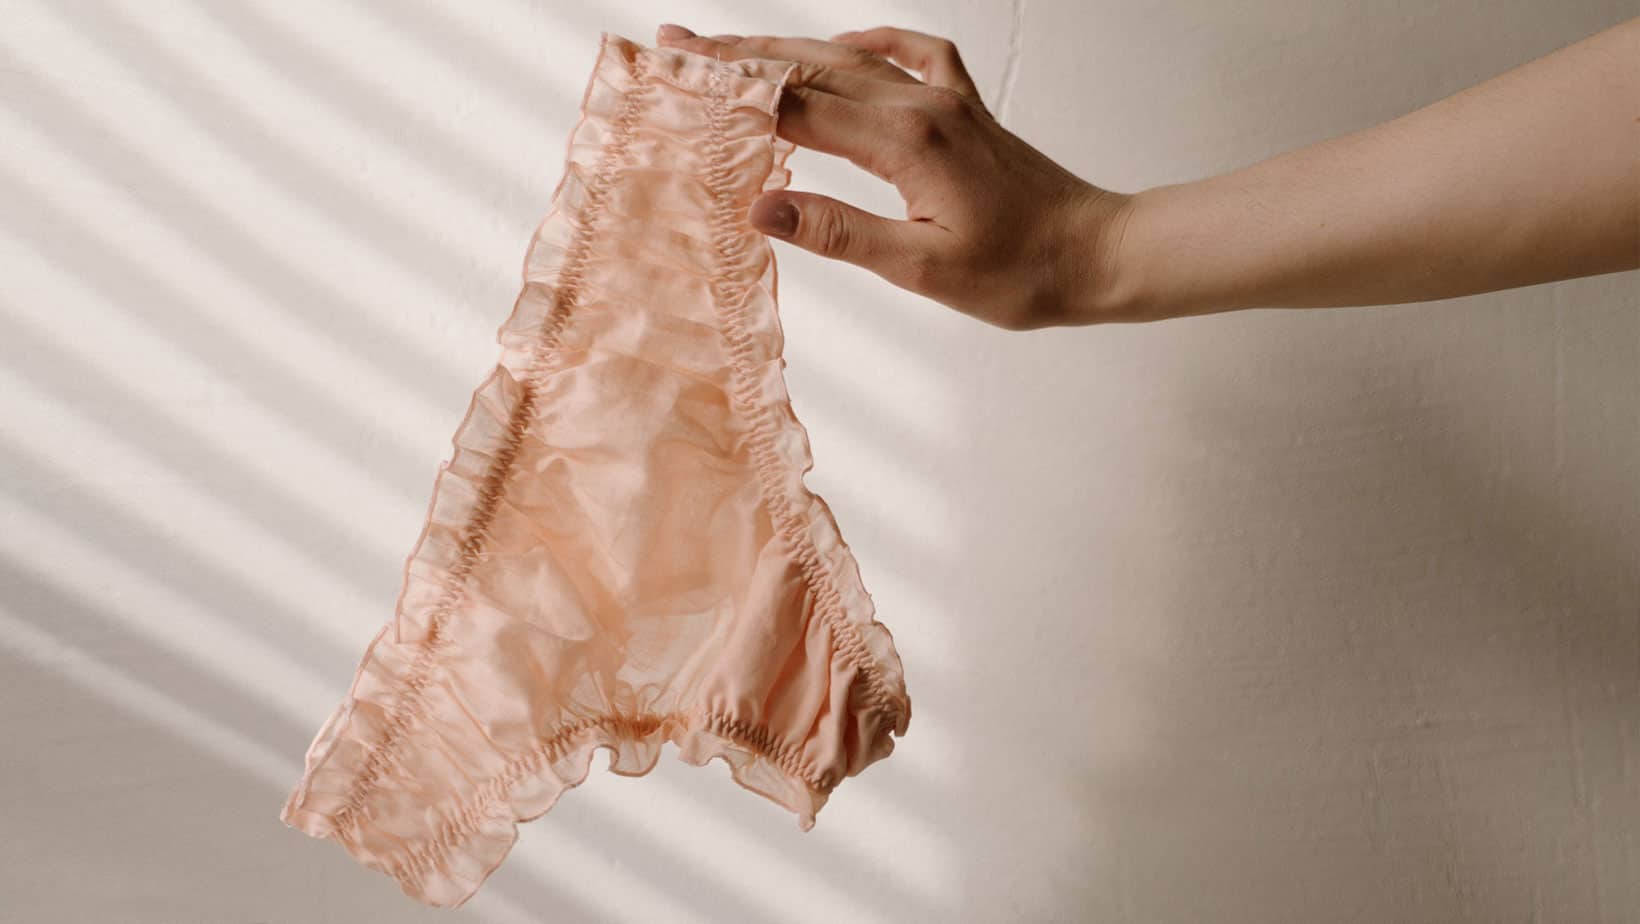 How to Sew Underwear  Make Your Own Lingerie